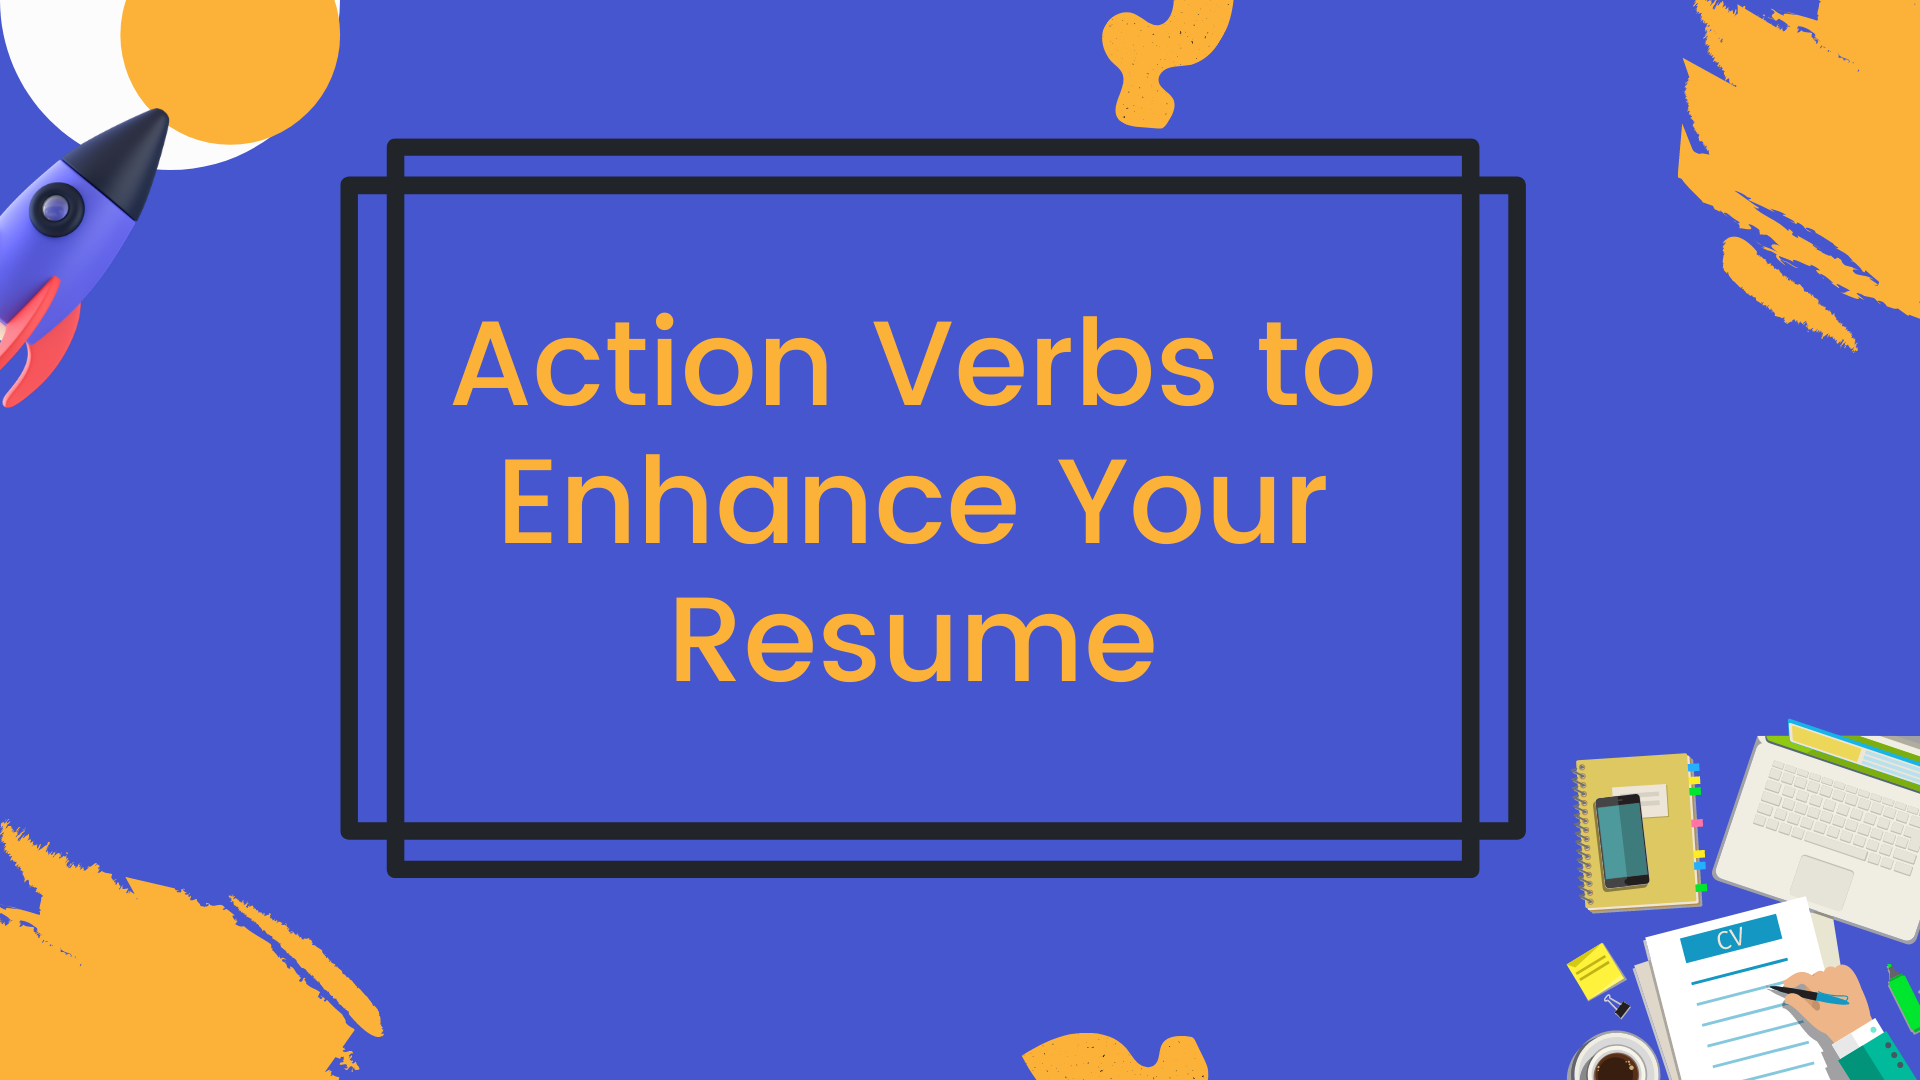 Don't Waste Time! 5 Facts To Start Resume